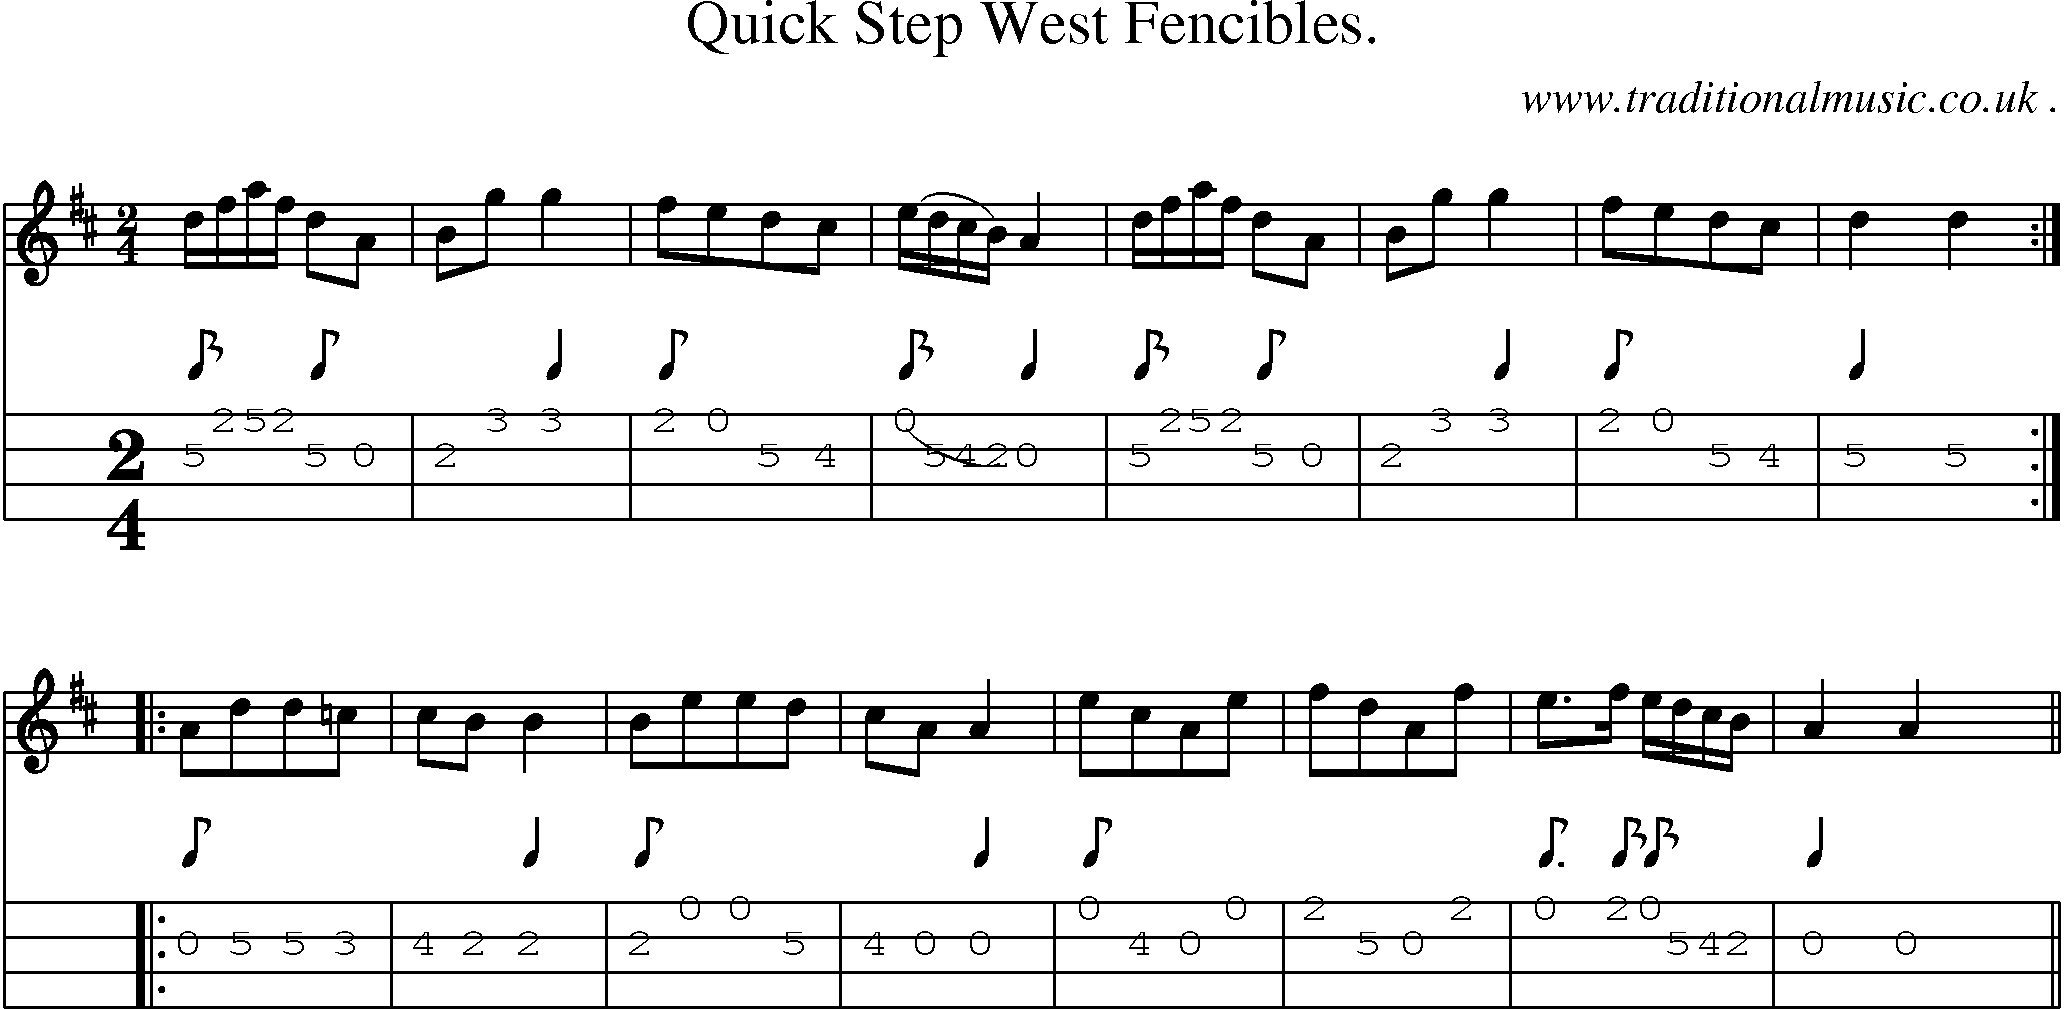 Sheet-music  score, Chords and Mandolin Tabs for Quick Step West Fencibles